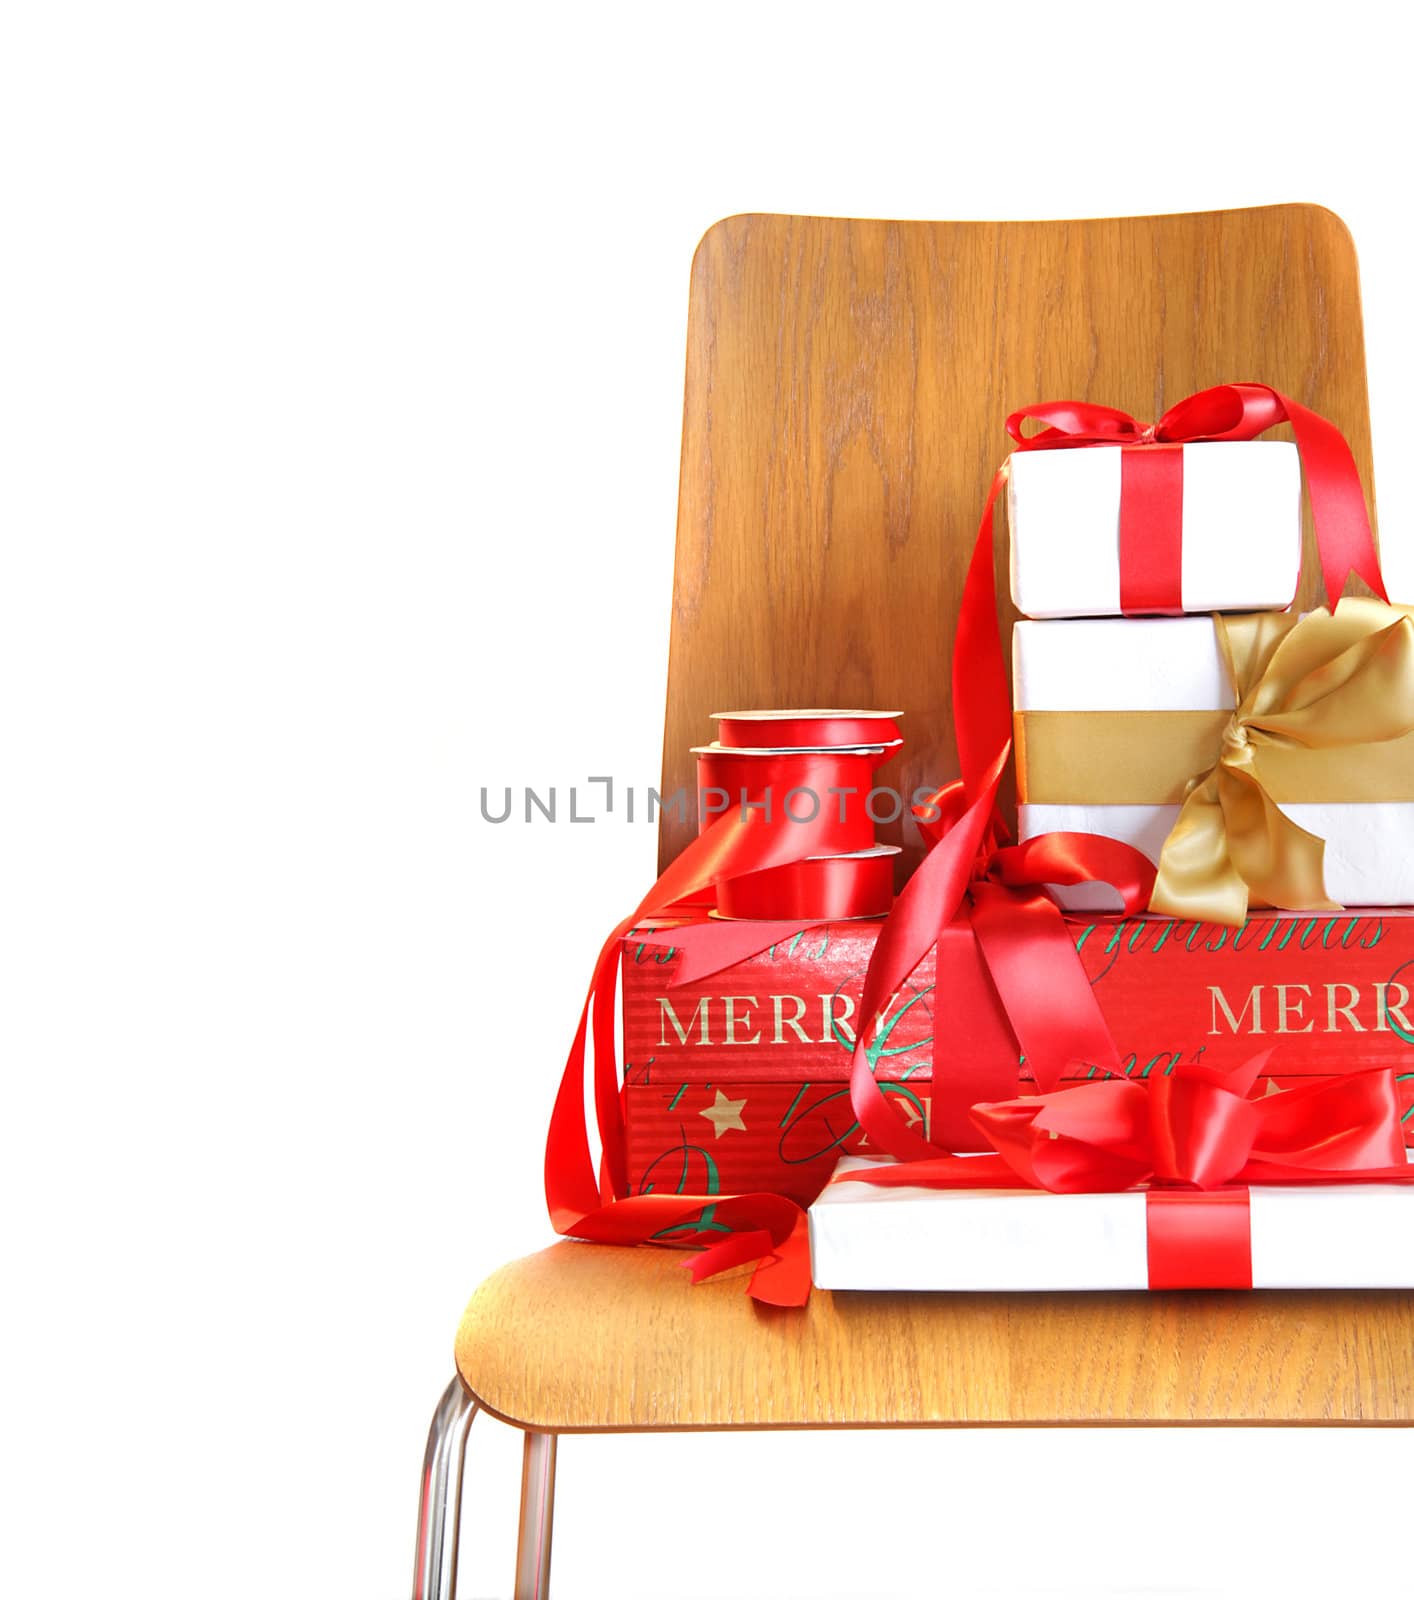 Pile of gifts on wooden chair against white background